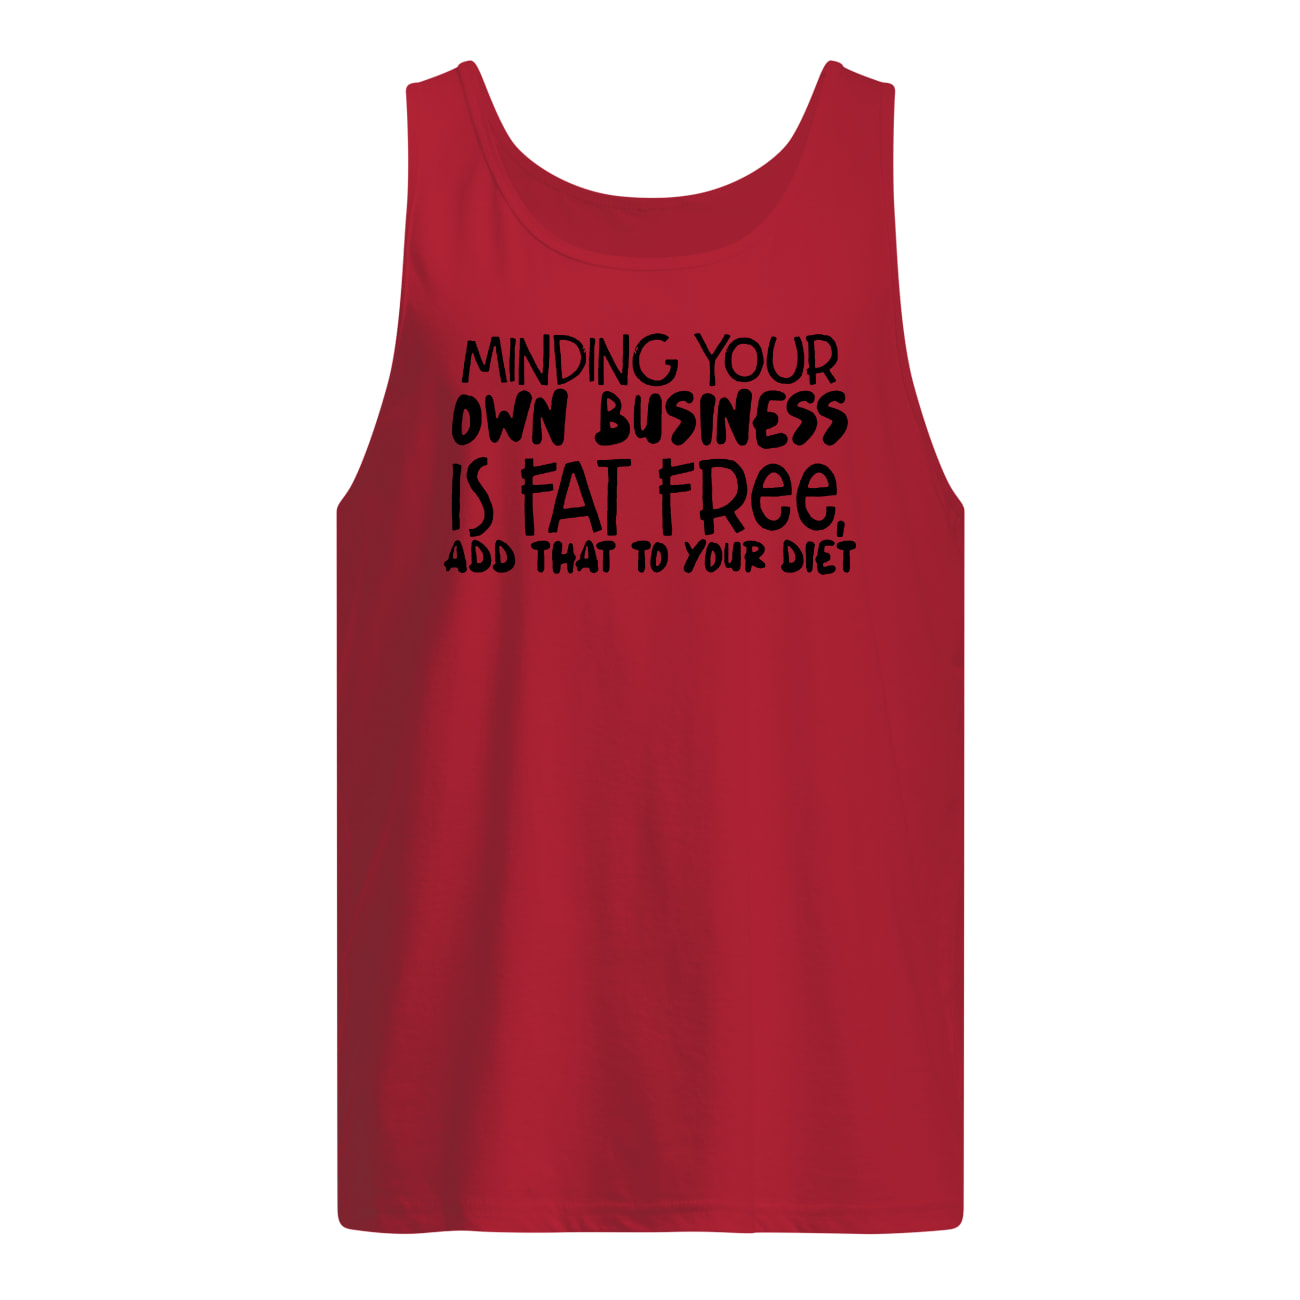 Minding your own business is fat free add that to your diet tank top